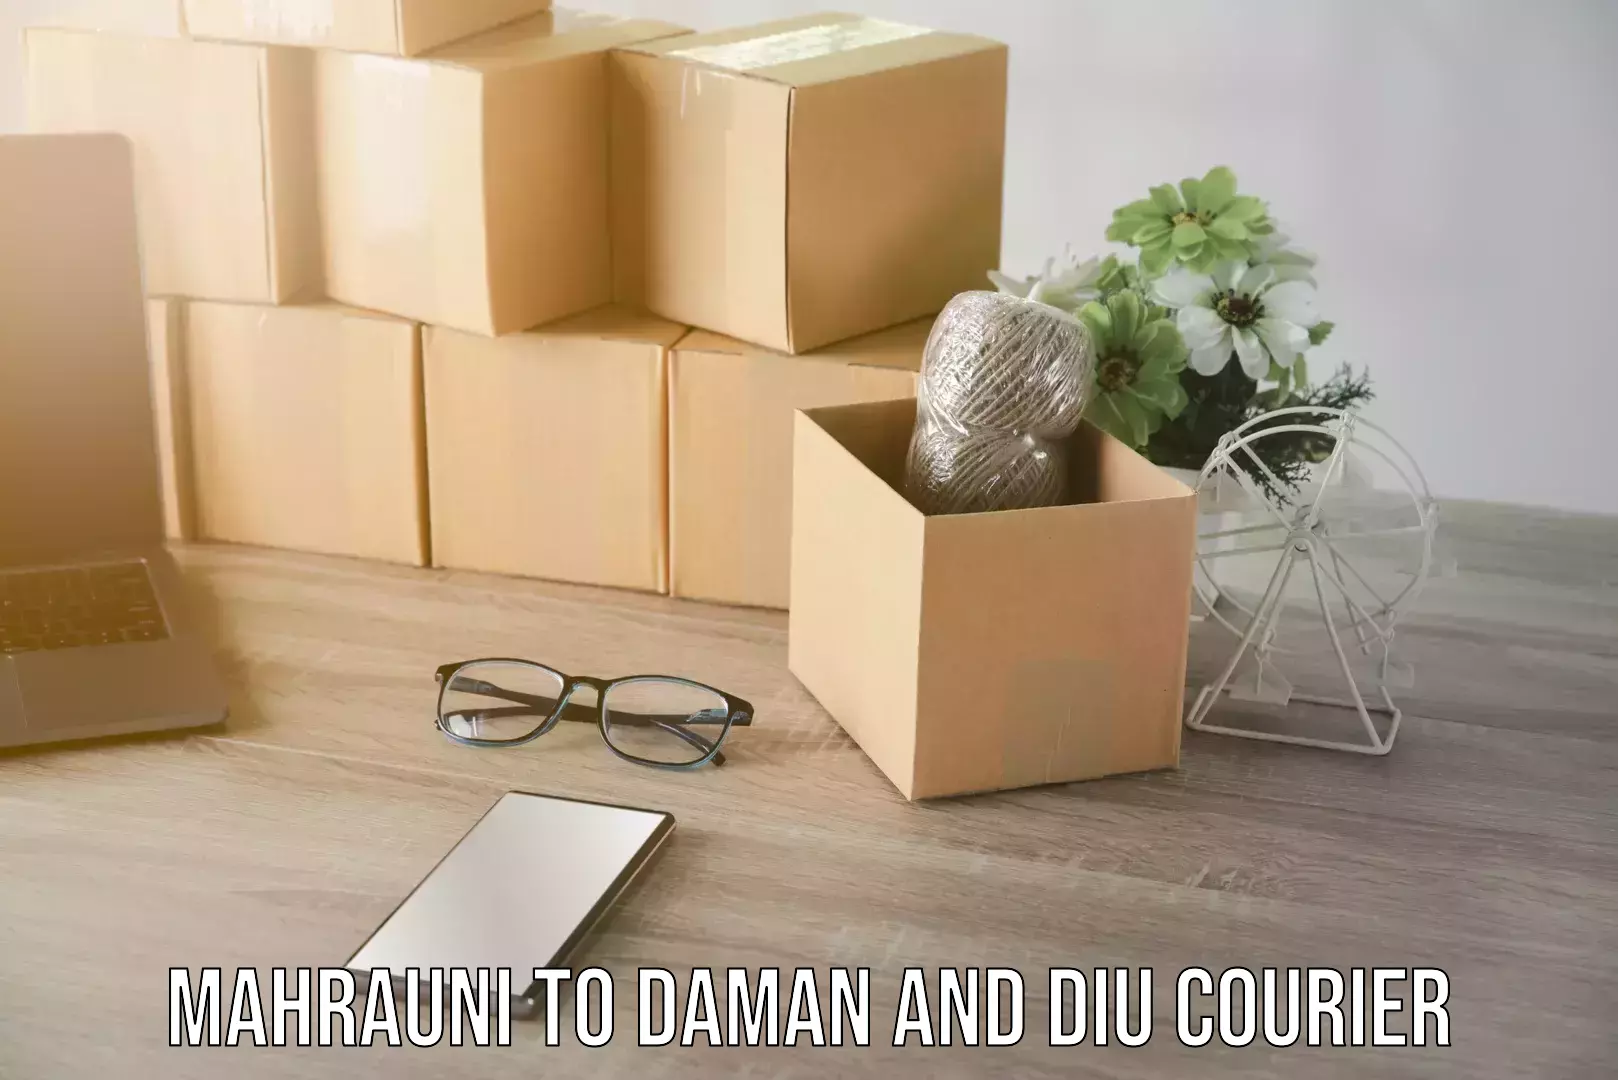 Moving and storage services Mahrauni to Daman and Diu